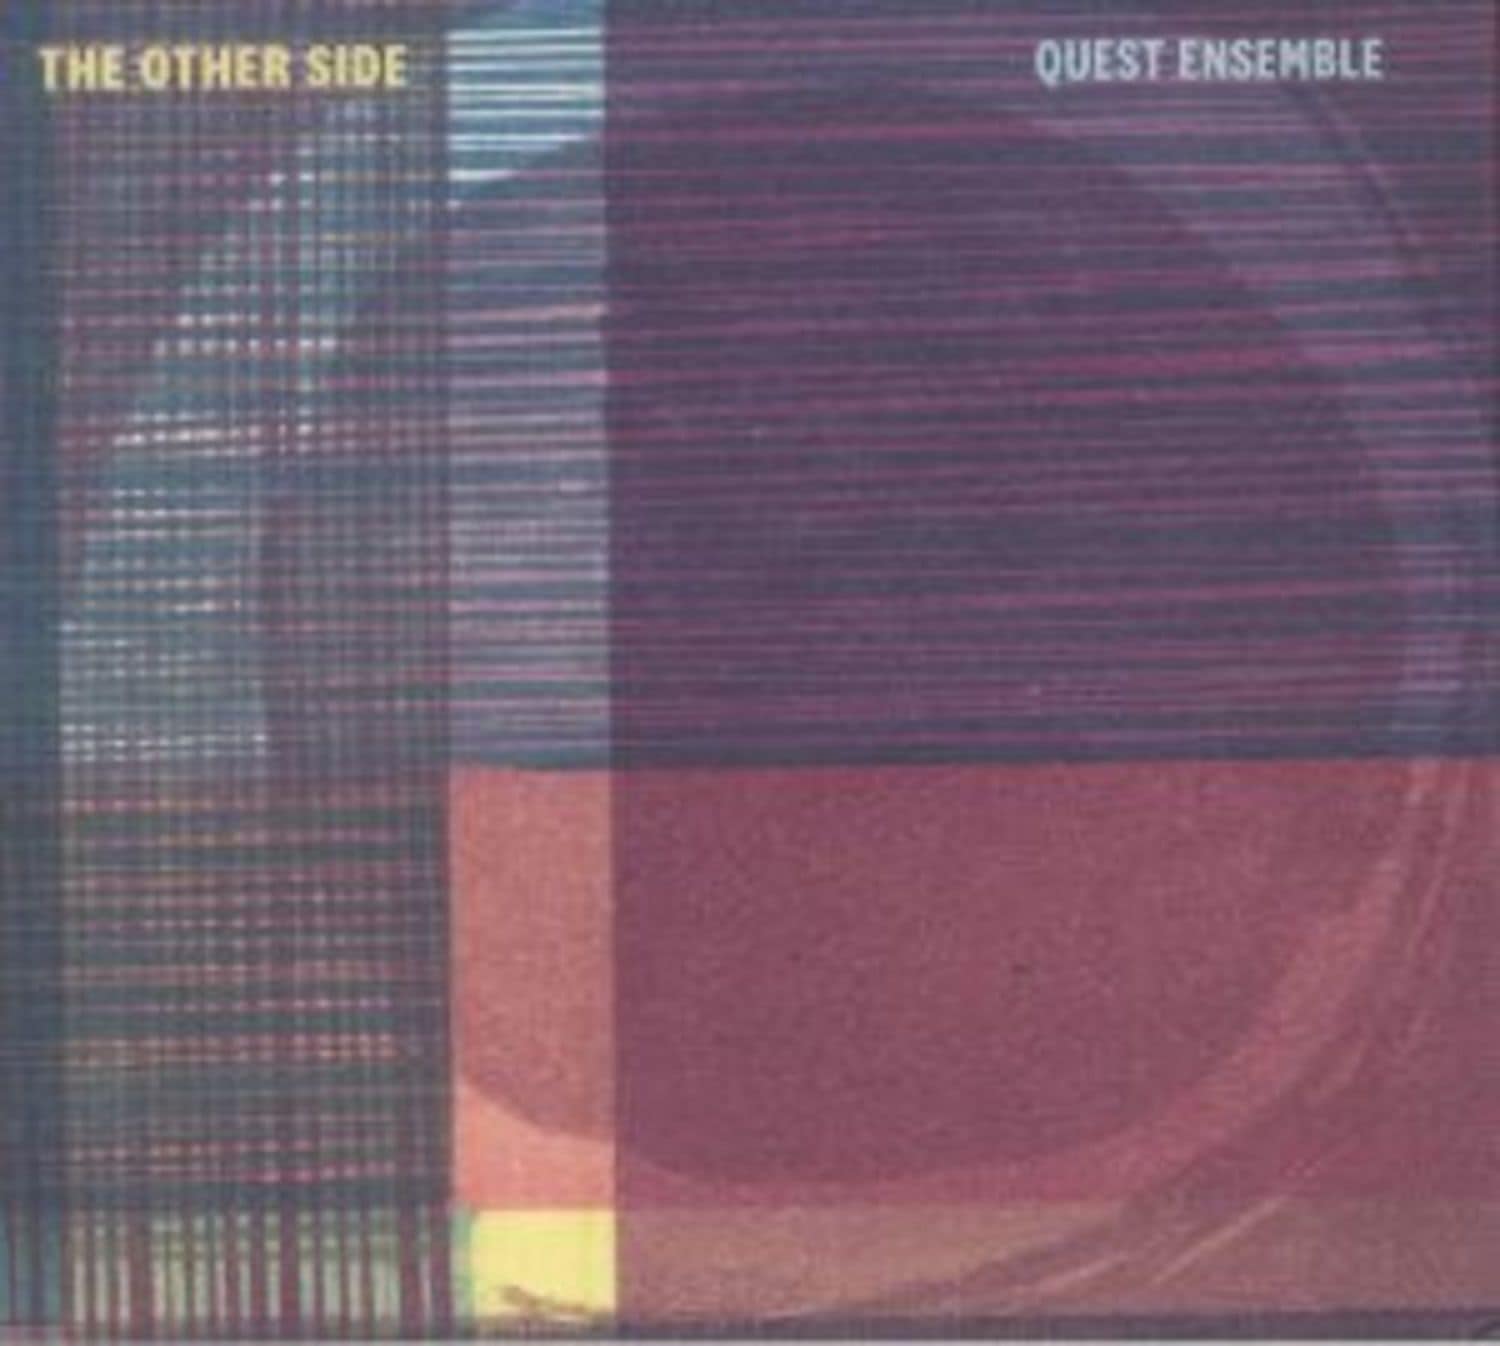 Quest Ensemble - THE OTHER SIDE 